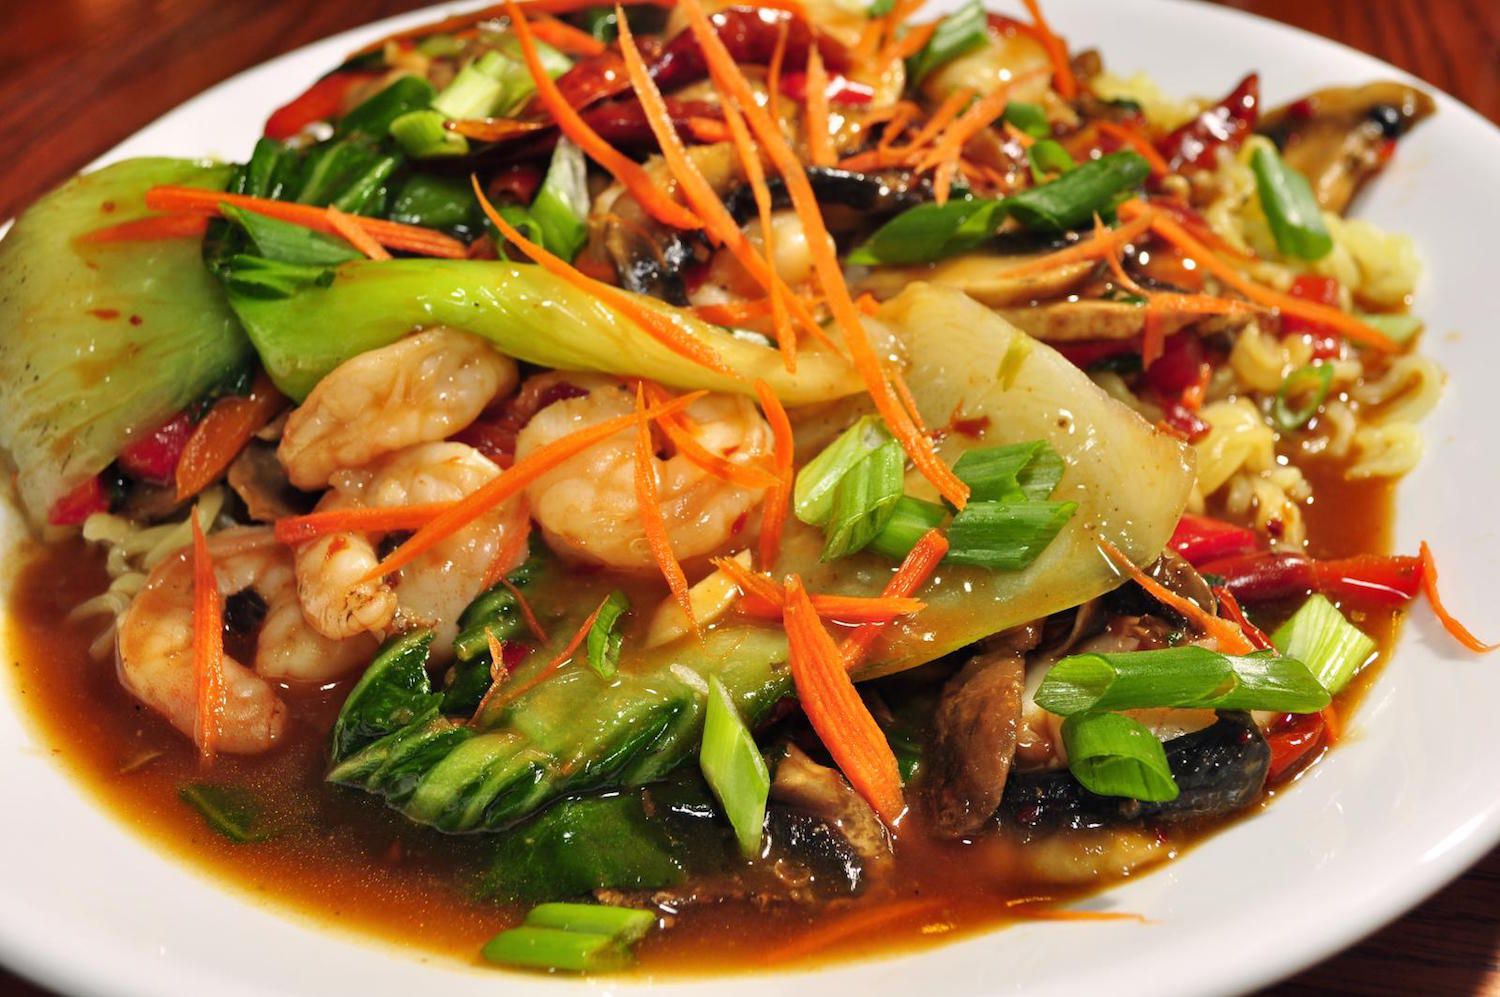 Shrimp StirFry Recipe With Chinese Greens